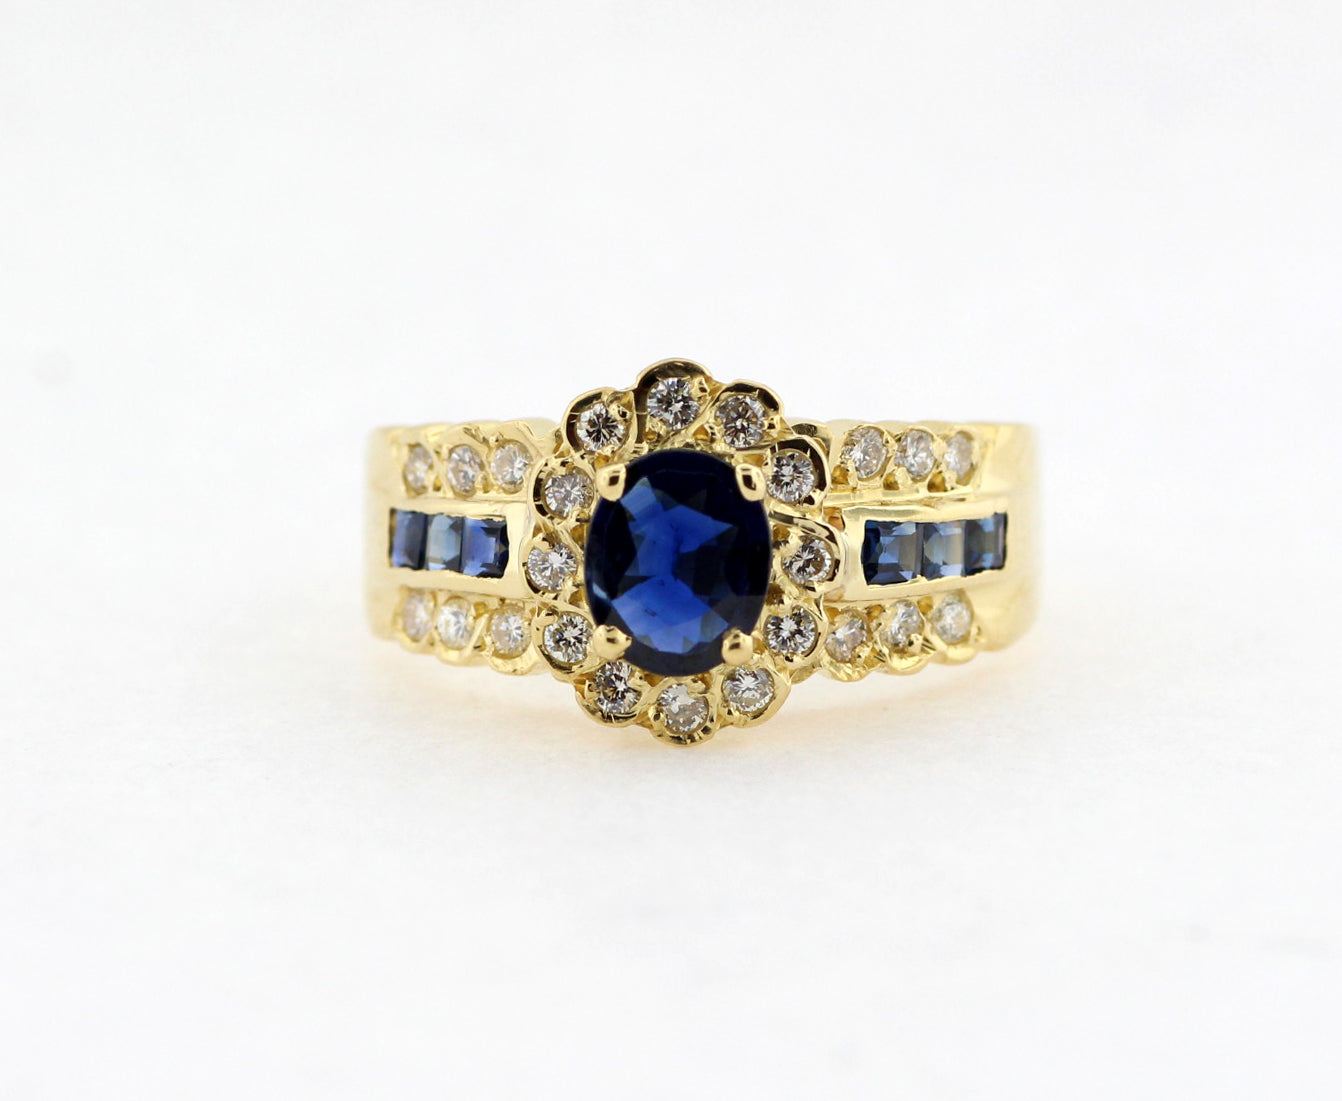 ESTATE 18KY .95 CTTW SAPPHIRE AND DIAMOND RING  .24 CTTW GH-VS2